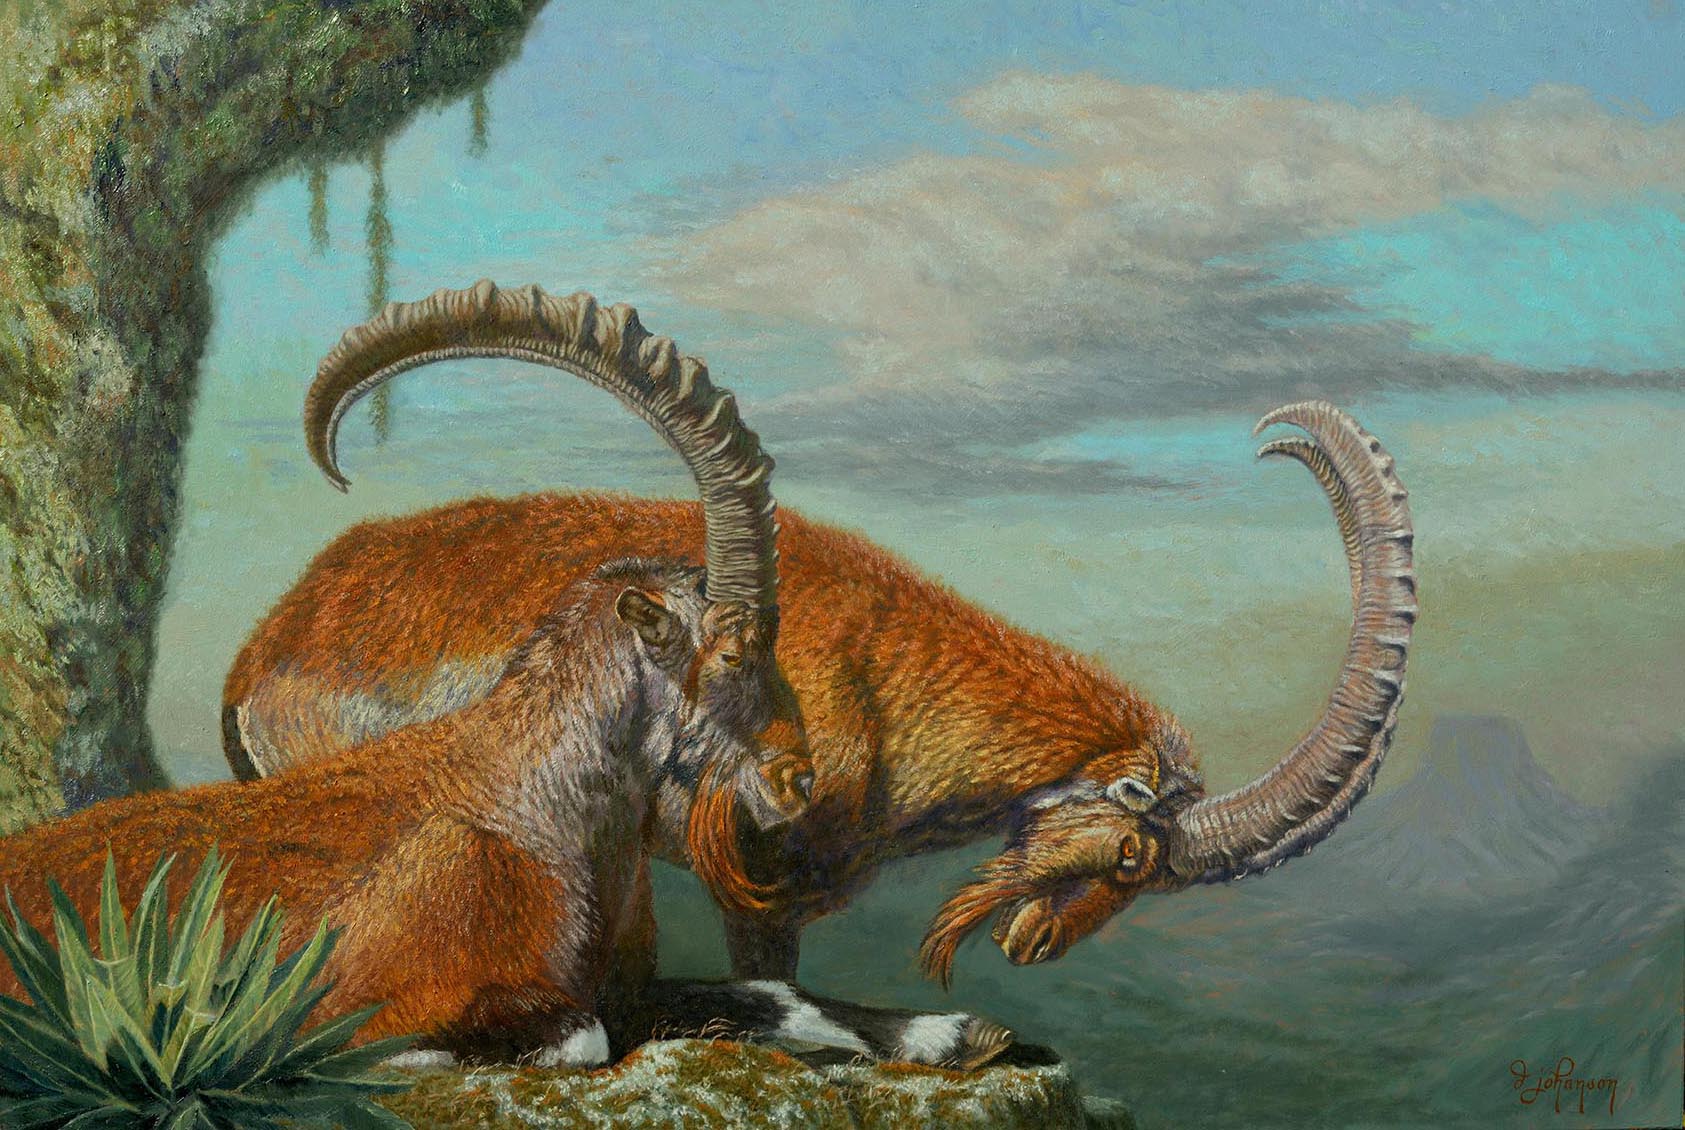 A painting of an animal with long horns